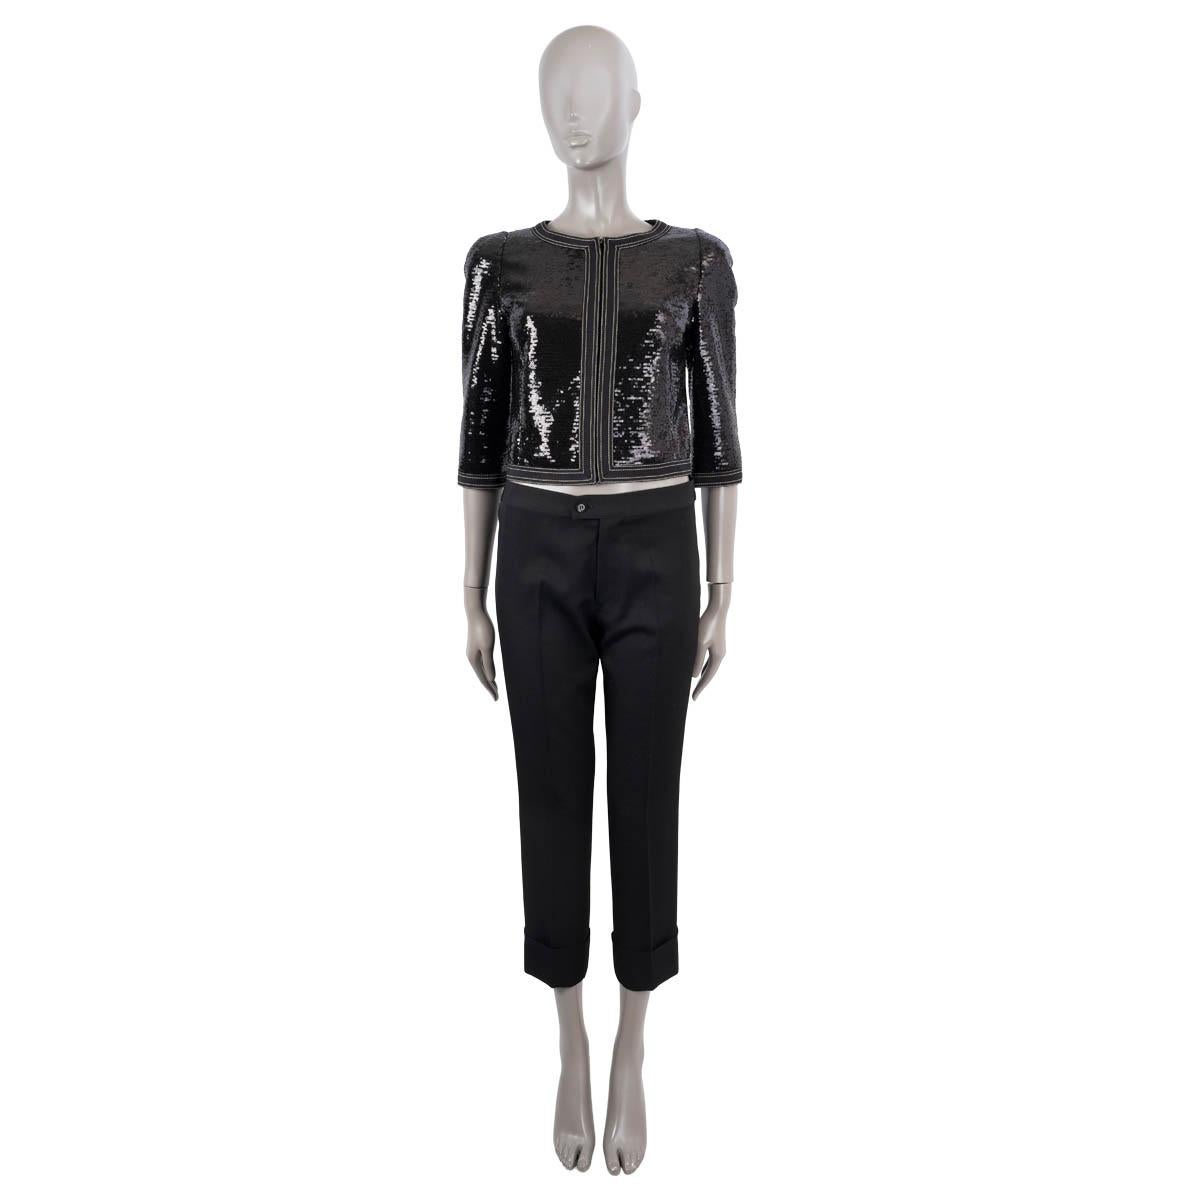 100% authentic Chanel collarless sequin jacket in black and white polyester (100%). Features white stitching along the seams and 3/4 sleeves. Closes with a black zipper on the front. Lined in black silk (100%). Has been worn and is in excellent